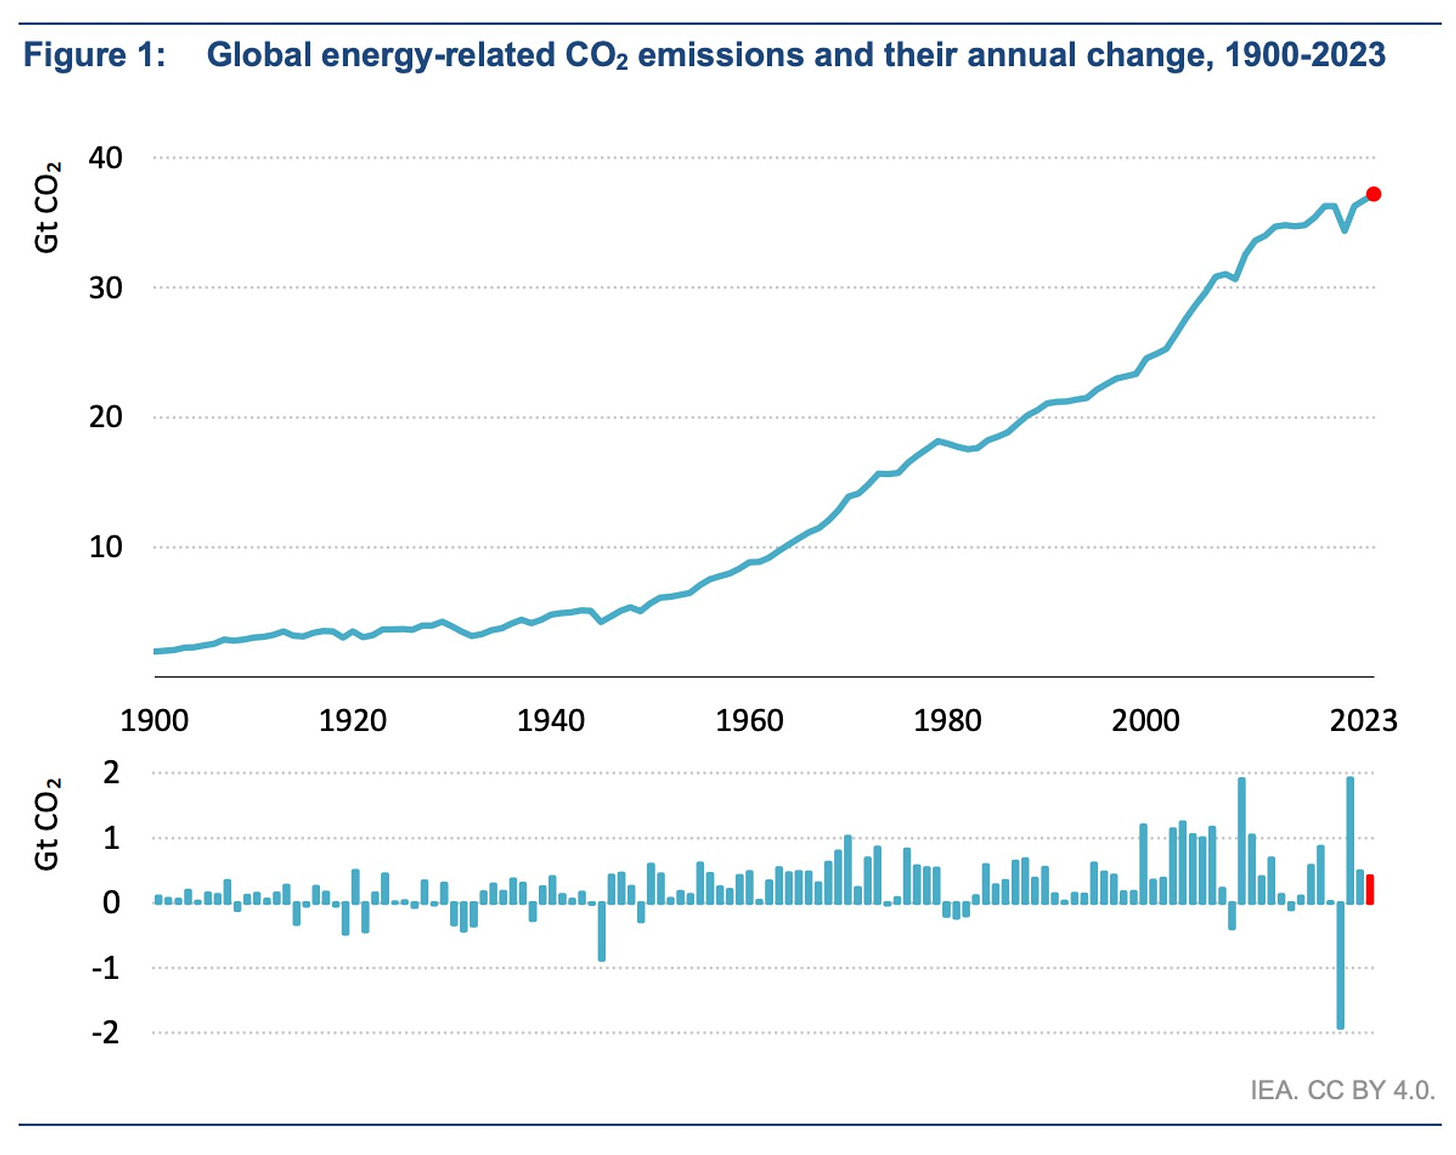 Global energy-related CO2 emissions and their annual rate of growth